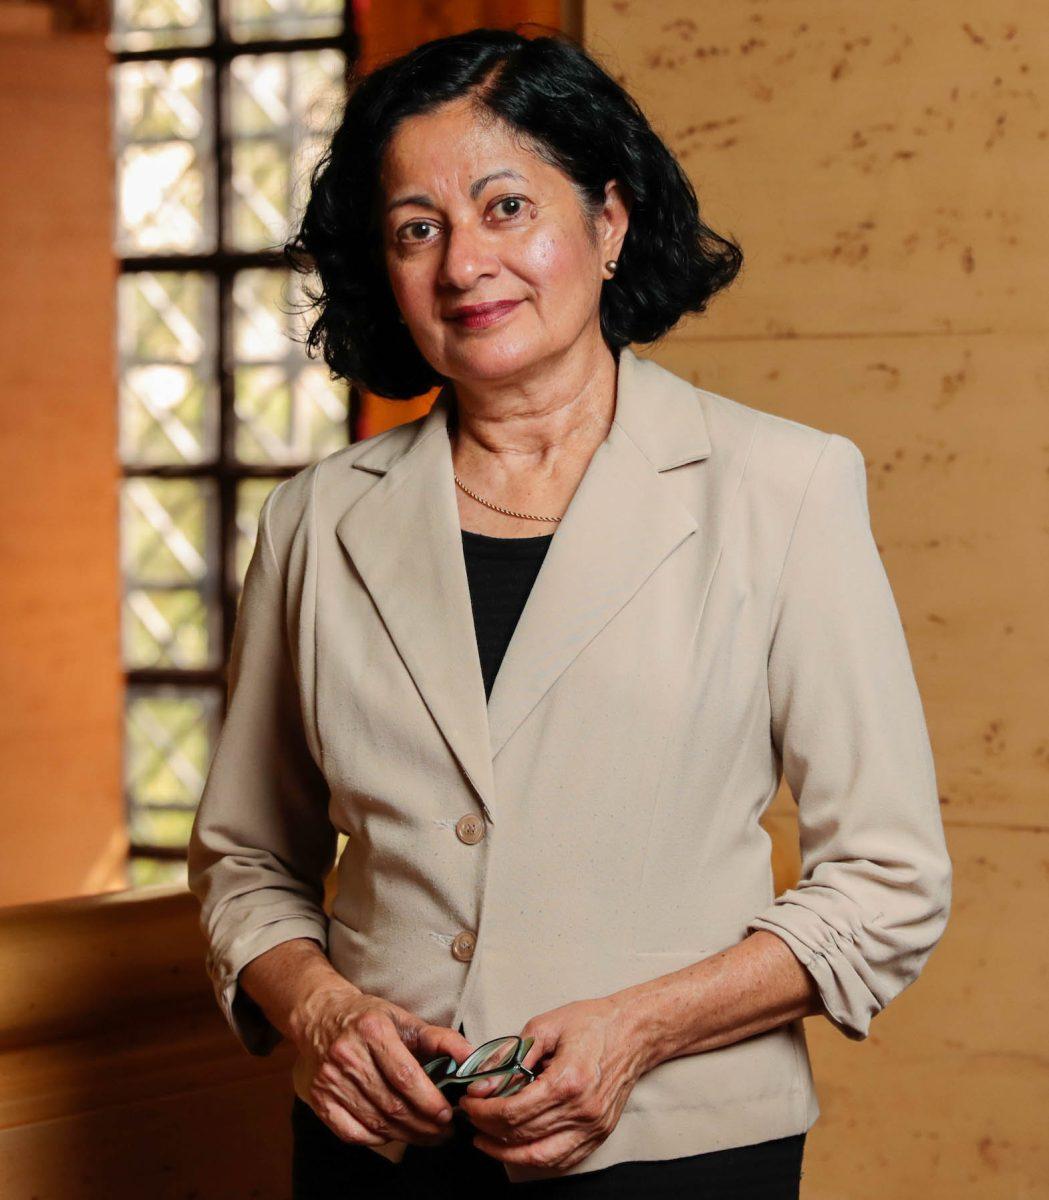 Texas+A%26amp%3BM+Liberal+Arts+professor+Jyotsna+Vaid+has+been+recognized+for+her+accomplishments+and+work+as+a+women+faculty+member+by+receiving+the+Eminent+Scholar+Award.